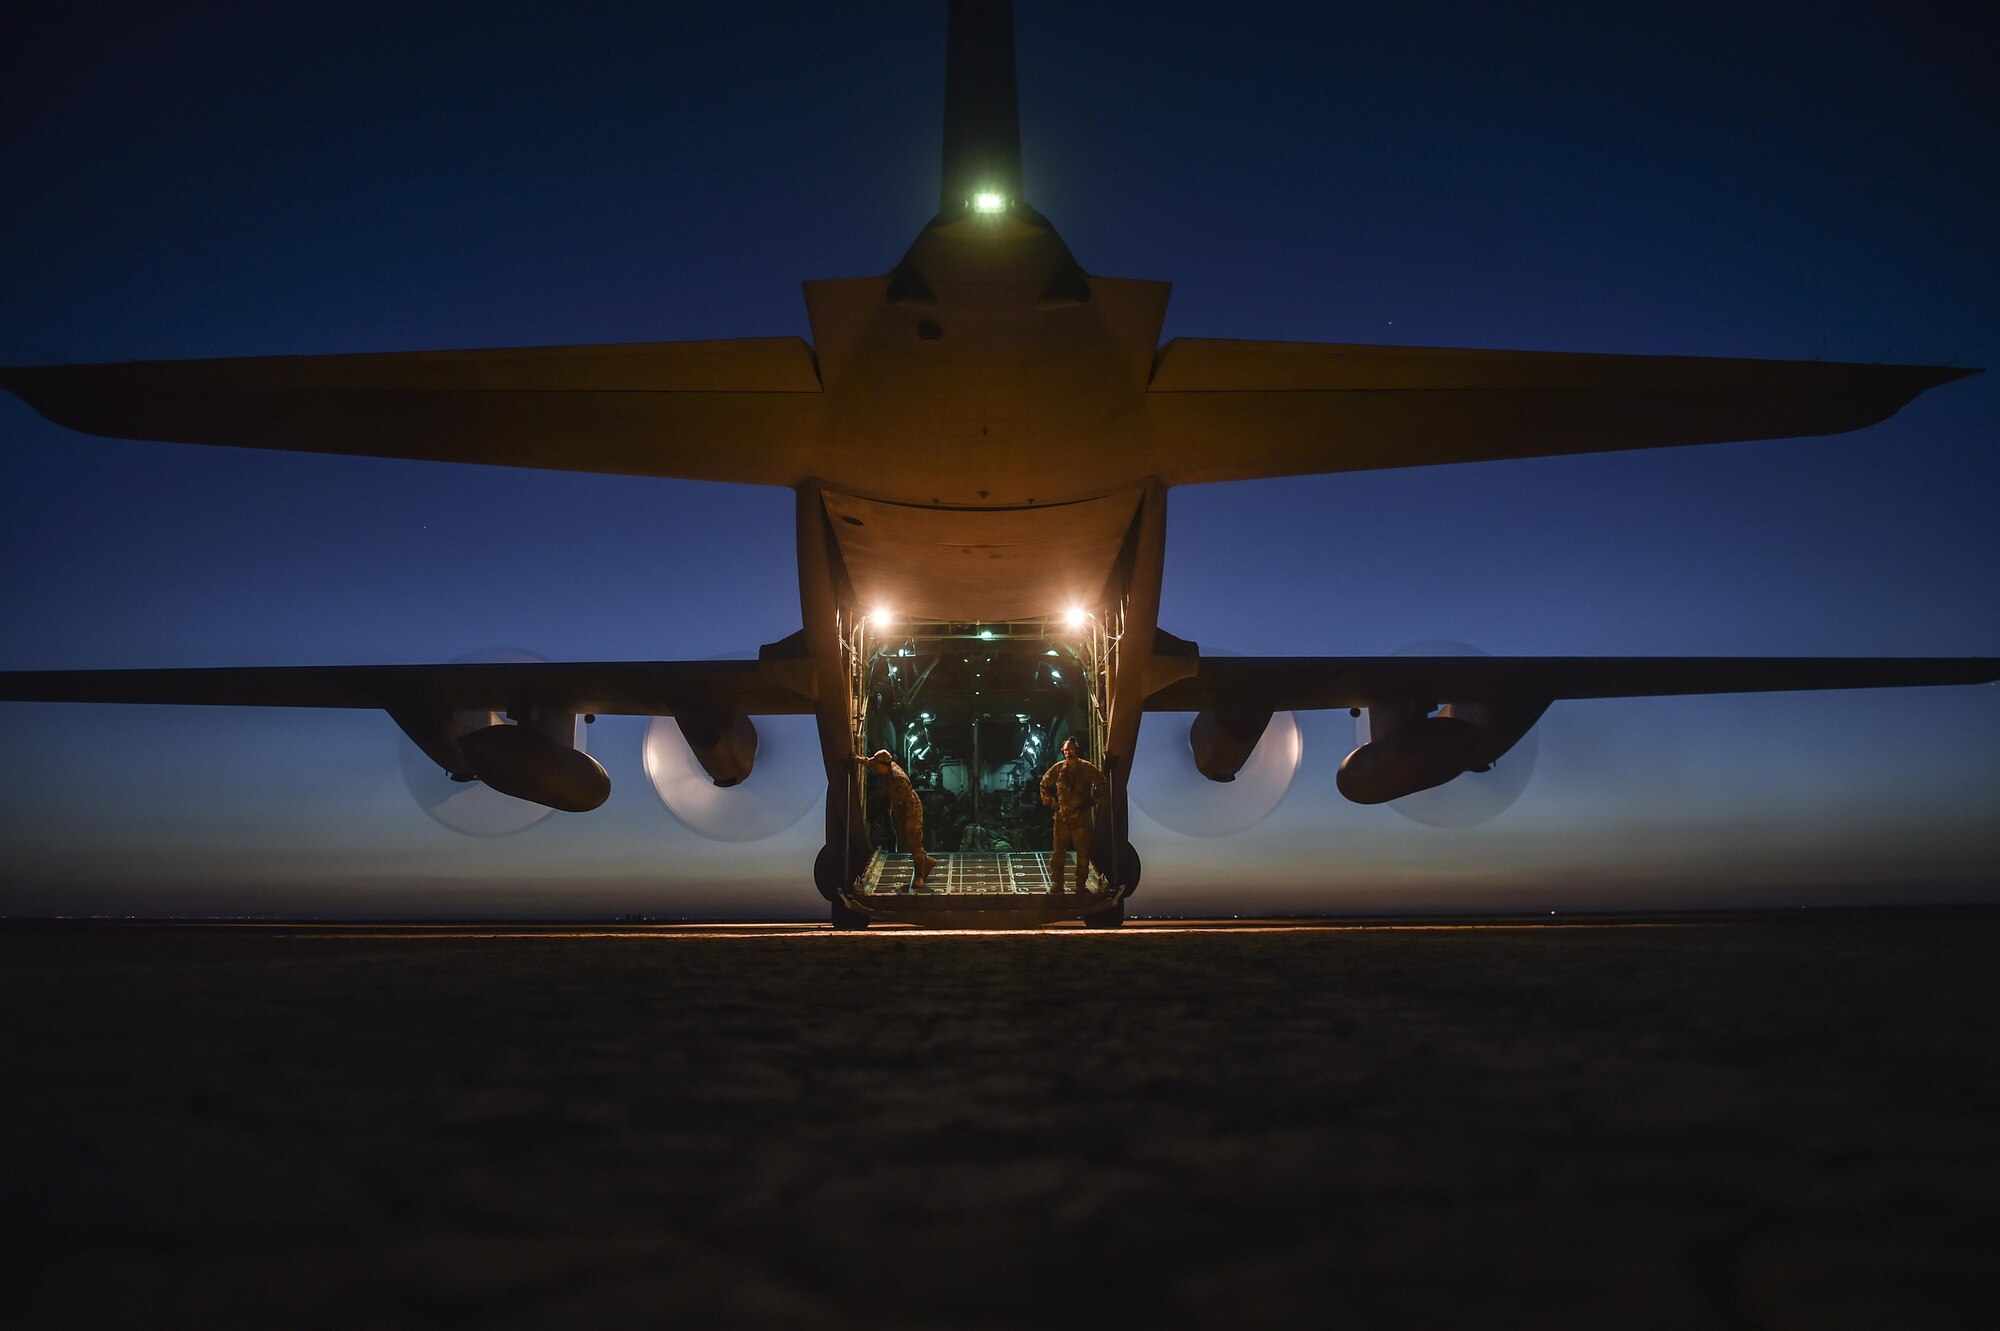 U.S. Air National Guard Airmen with the 127th Airlift Wing inspect a C-130H Hercules following a dry lake bed landing during Exercise Eager Lion, May 17, 2017, in Jordan. Eager Lion 2017, an annual U.S. Central Command exercise in Jordan designed to strengthen military-to-military relationships between the U.S., Jordan and other international partners. This year's iteration is comprised of about 7,200 military personnel from more than 20 nations that will respond to scenarios involving border security, command and control, cyber defense and battlespace management. (U.S. Air Force photo by Senior Airman Ryan Conroy) 